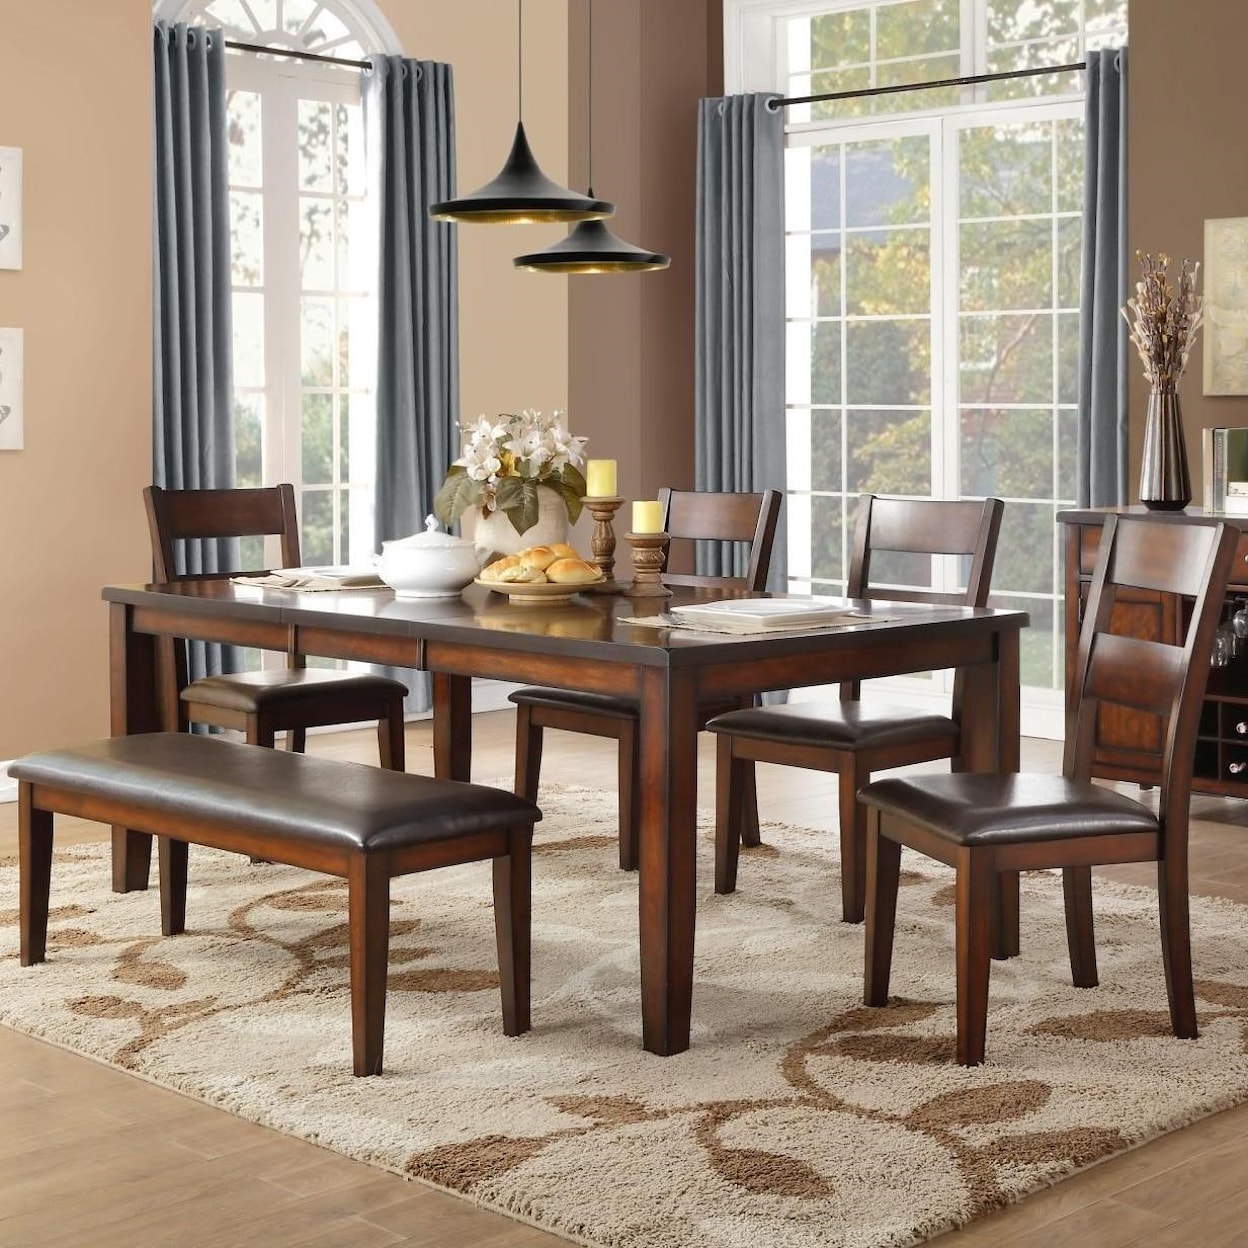 Homelegance Furniture Mantello Table & Chair Set with Bench